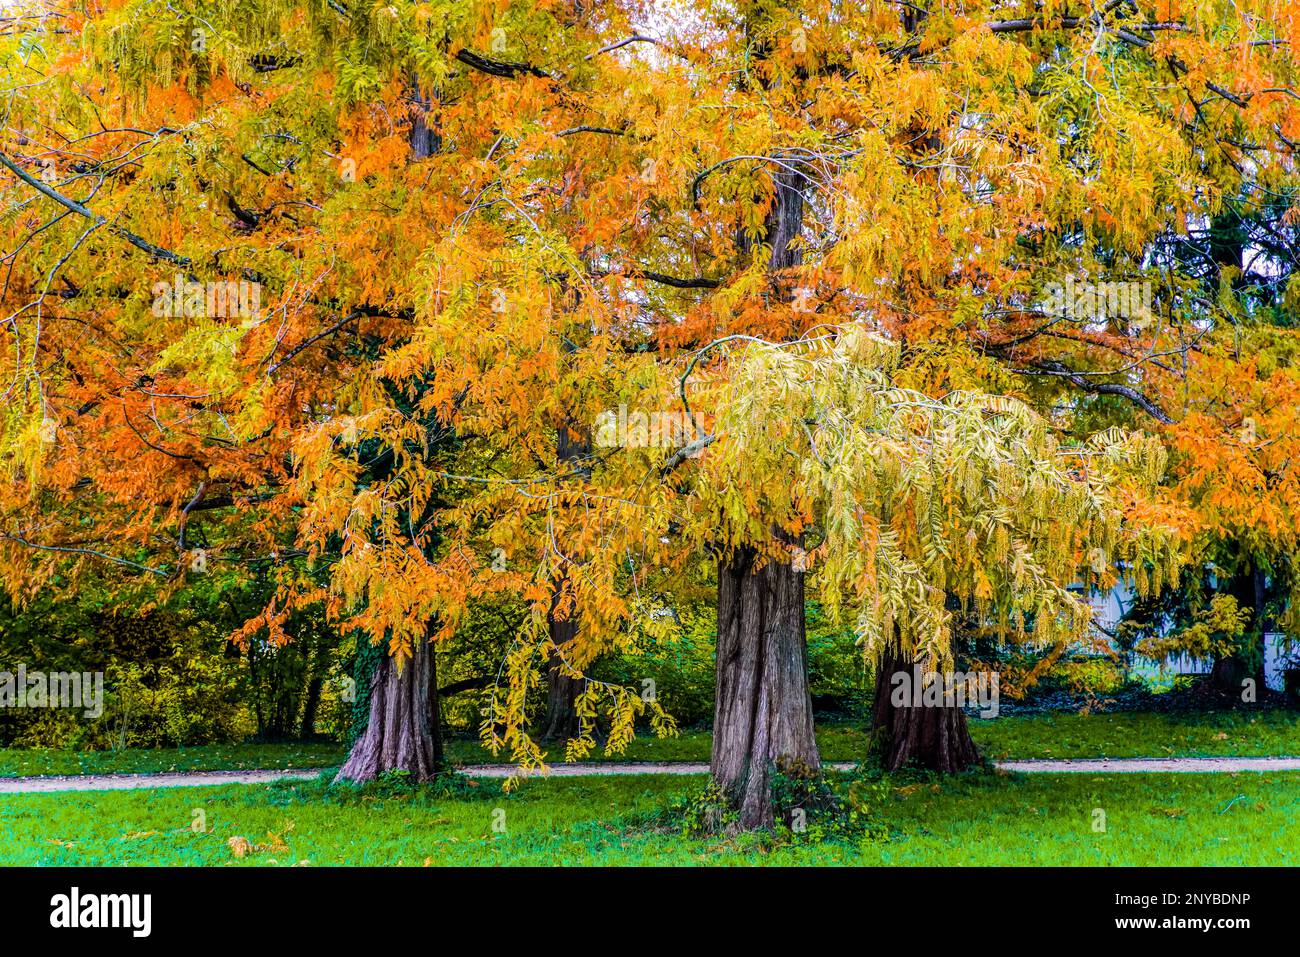 Fall Colours at Wenkenhof Park, Riehen, canton of Basel-Stadt, Switzerland. Stock Photo